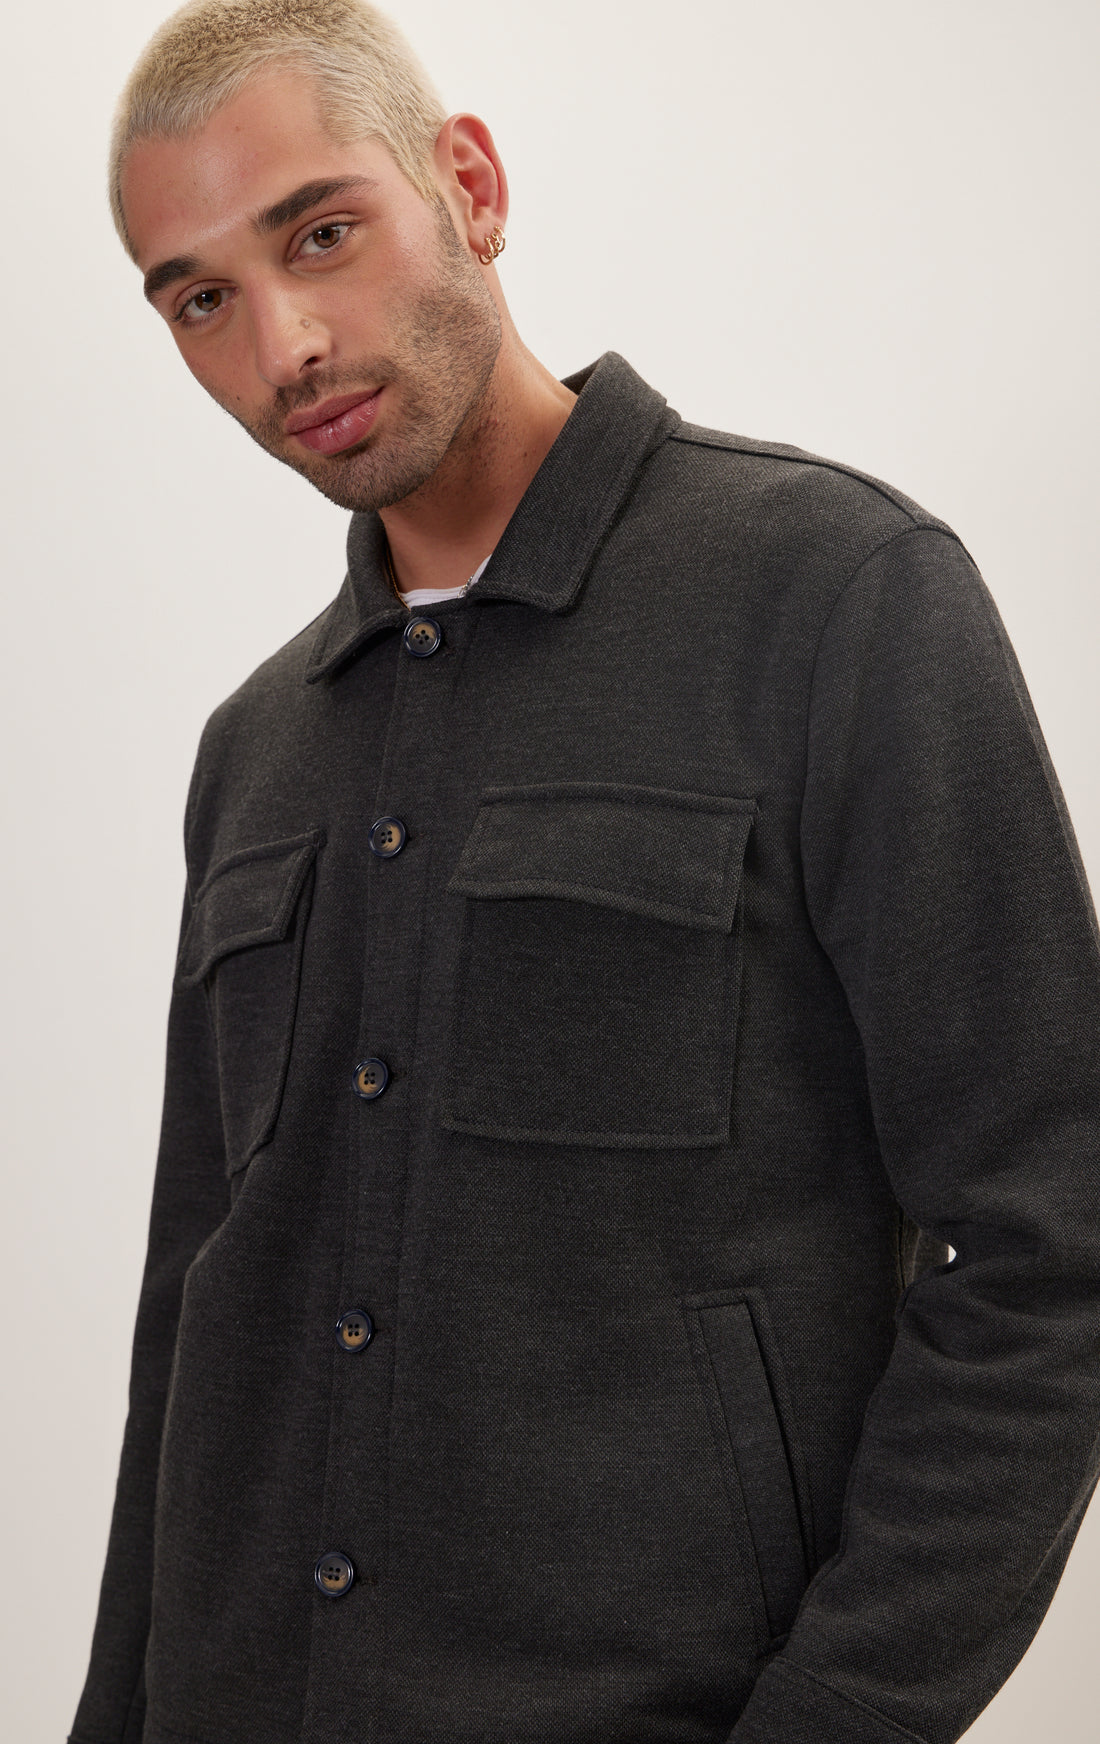 Full Button Up Jacket - Anthracite